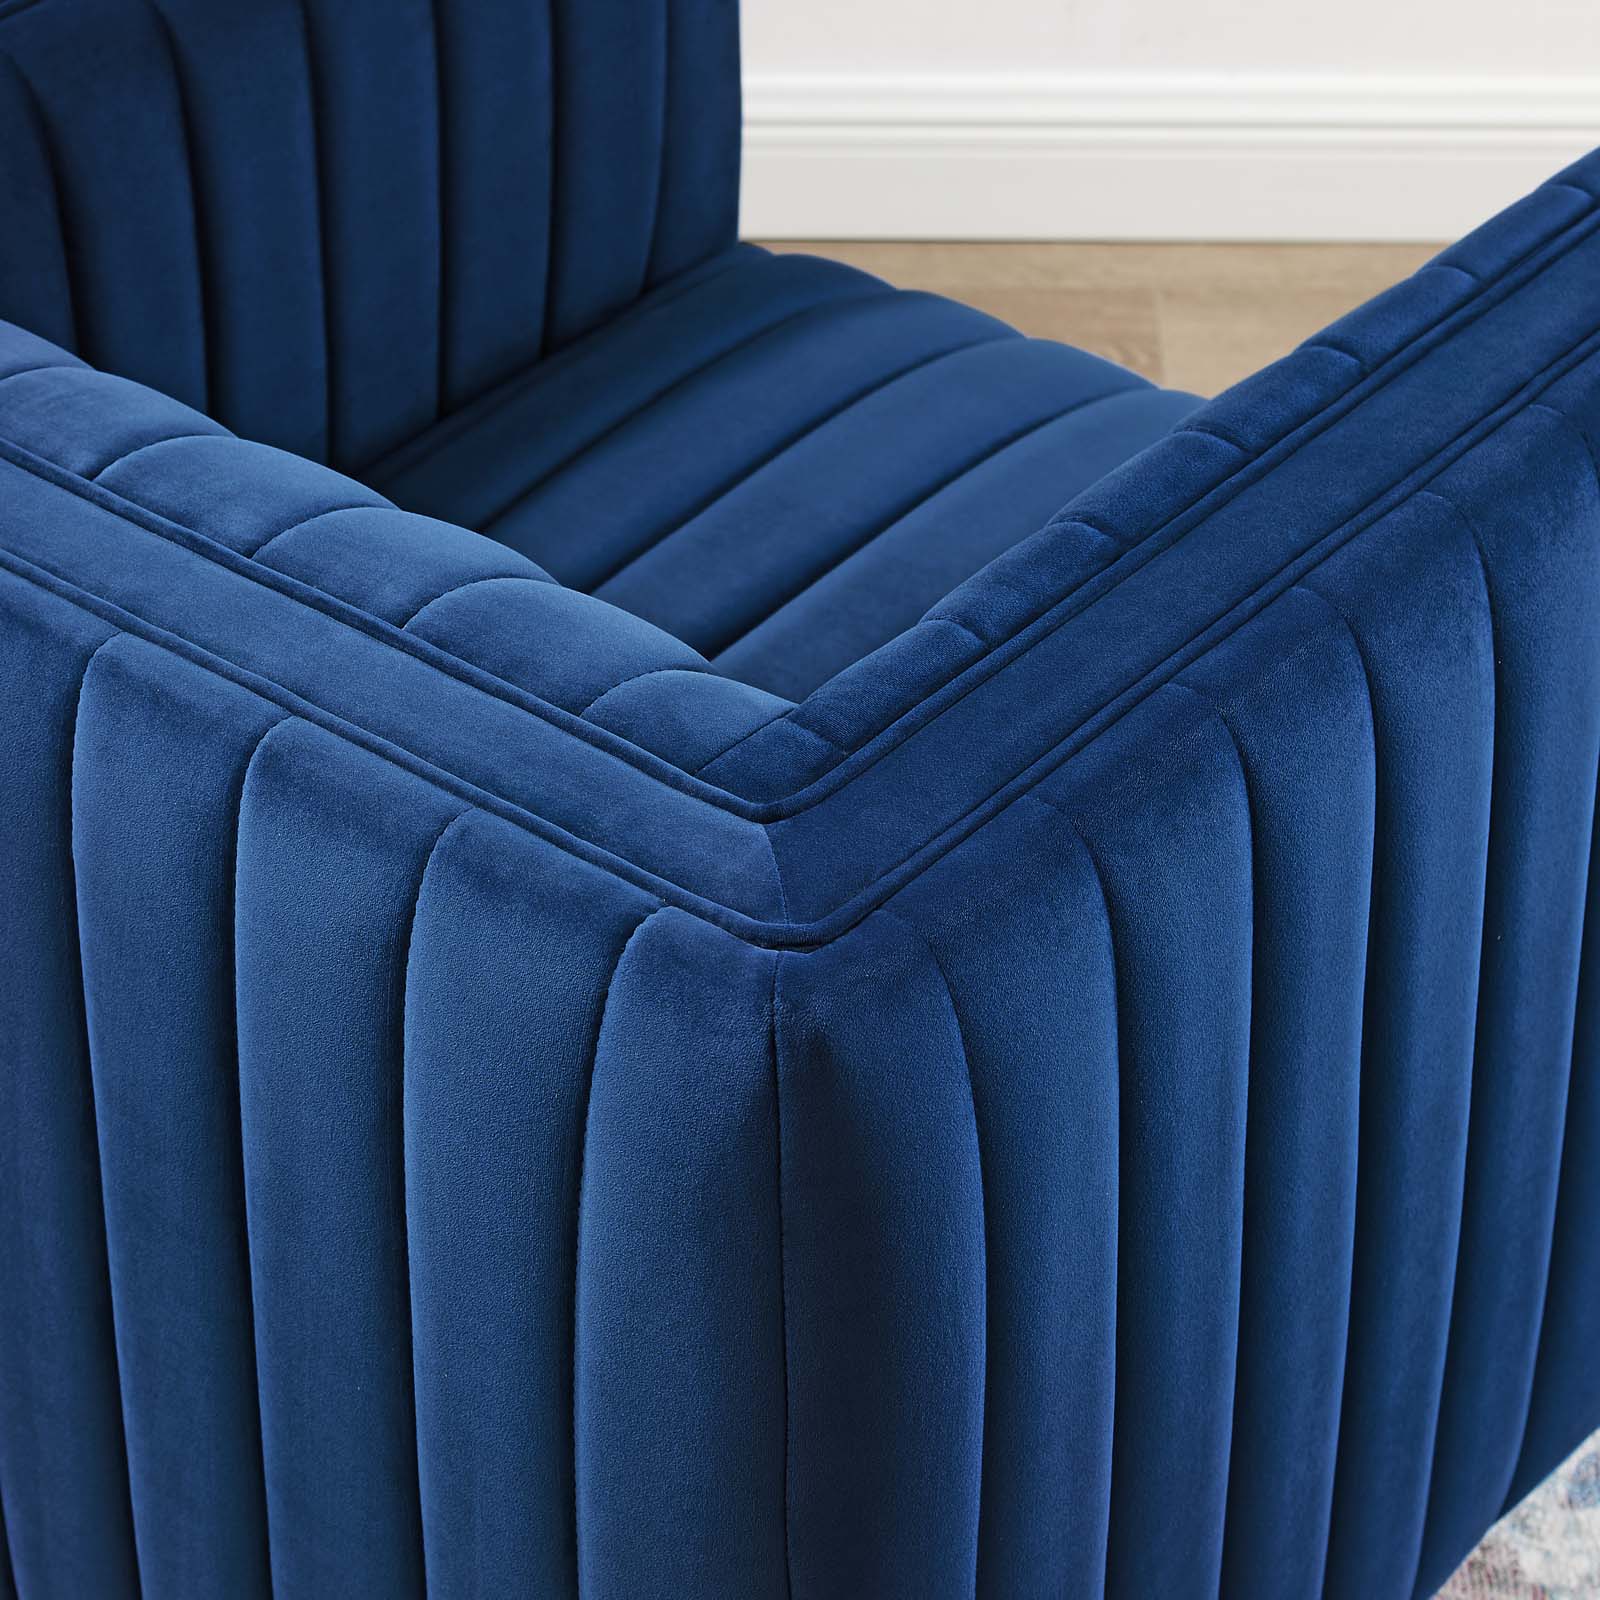 Modway Accent Chairs - Conjure Channel Tufted Performance Velvet Swivel Armchair Navy